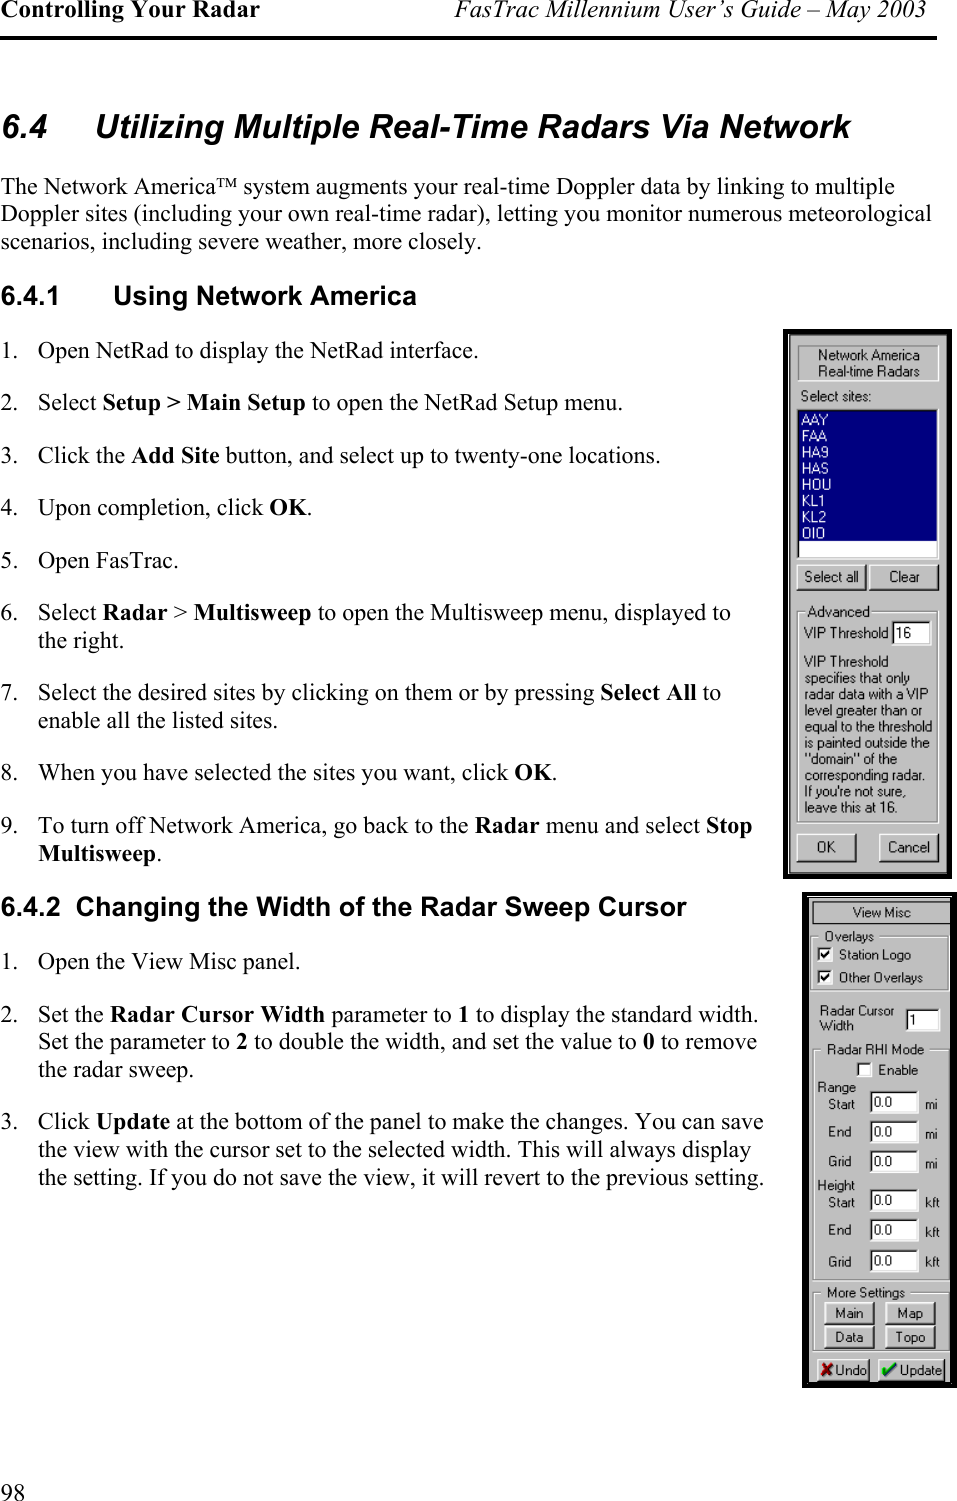 Controlling Your Radar  FasTrac Millennium User’s Guide – May 2003 6.4  Utilizing Multiple Real-Time Radars Via Network The Network America system augments your real-time Doppler data by linking to multiple Doppler sites (including your own real-time radar), letting you monitor numerous meteorological scenarios, including severe weather, more closely. 6.4.1  Using Network America 1.  Open NetRad to display the NetRad interface. 2. Select Setup &gt; Main Setup to open the NetRad Setup menu. 3. Click the Add Site button, and select up to twenty-one locations. 4.  Upon completion, click OK. 5.  Open FasTrac.  6. Select Radar &gt; Multisweep to open the Multisweep menu, displayed to the right. 7.  Select the desired sites by clicking on them or by pressing Select All to enable all the listed sites.  8.  When you have selected the sites you want, click OK.  9.  To turn off Network America, go back to the Radar menu and select Stop Multisweep. 6.4.2  Changing the Width of the Radar Sweep Cursor 1.  Open the View Misc panel. 2. Set the Radar Cursor Width parameter to 1 to display the standard width. Set the parameter to 2 to double the width, and set the value to 0 to remove the radar sweep. 3. Click Update at the bottom of the panel to make the changes. You can save the view with the cursor set to the selected width. This will always display the setting. If you do not save the view, it will revert to the previous setting. 98 